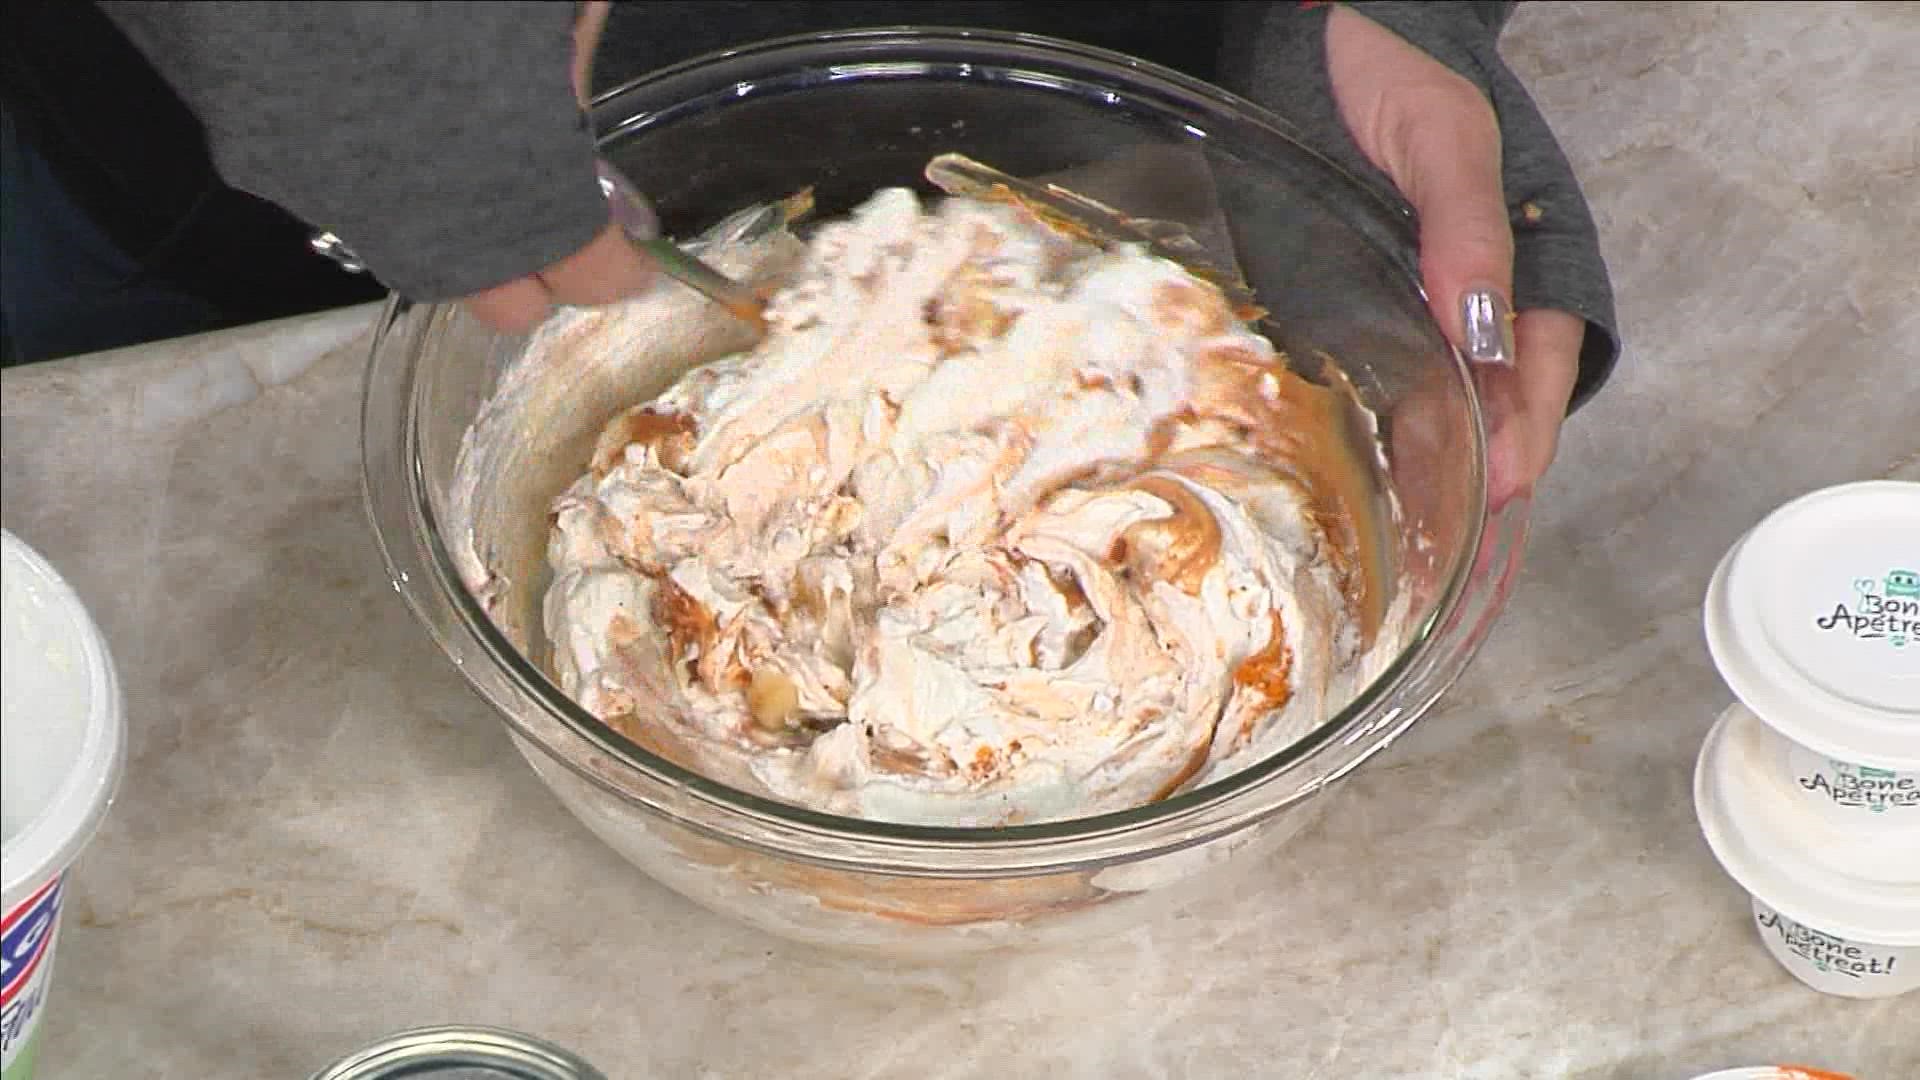 Tiffany Brown from Bone Apetreat teaches us how to make frozen yogurt for dogs.